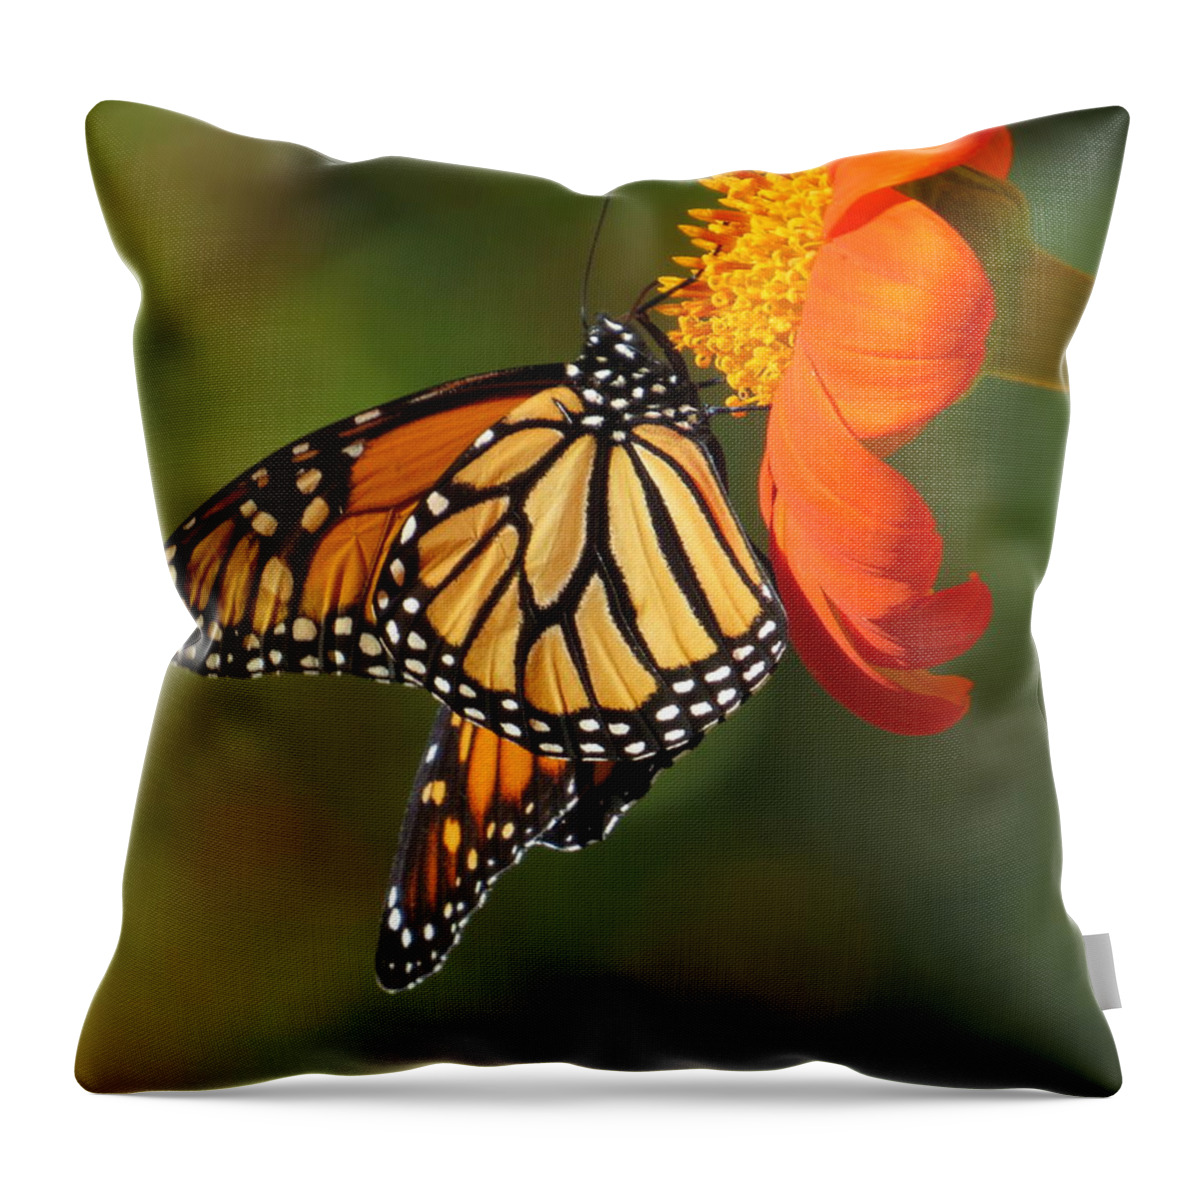 Flower Throw Pillow featuring the photograph Butterfly Kiss 2 by Jeanette Oberholtzer